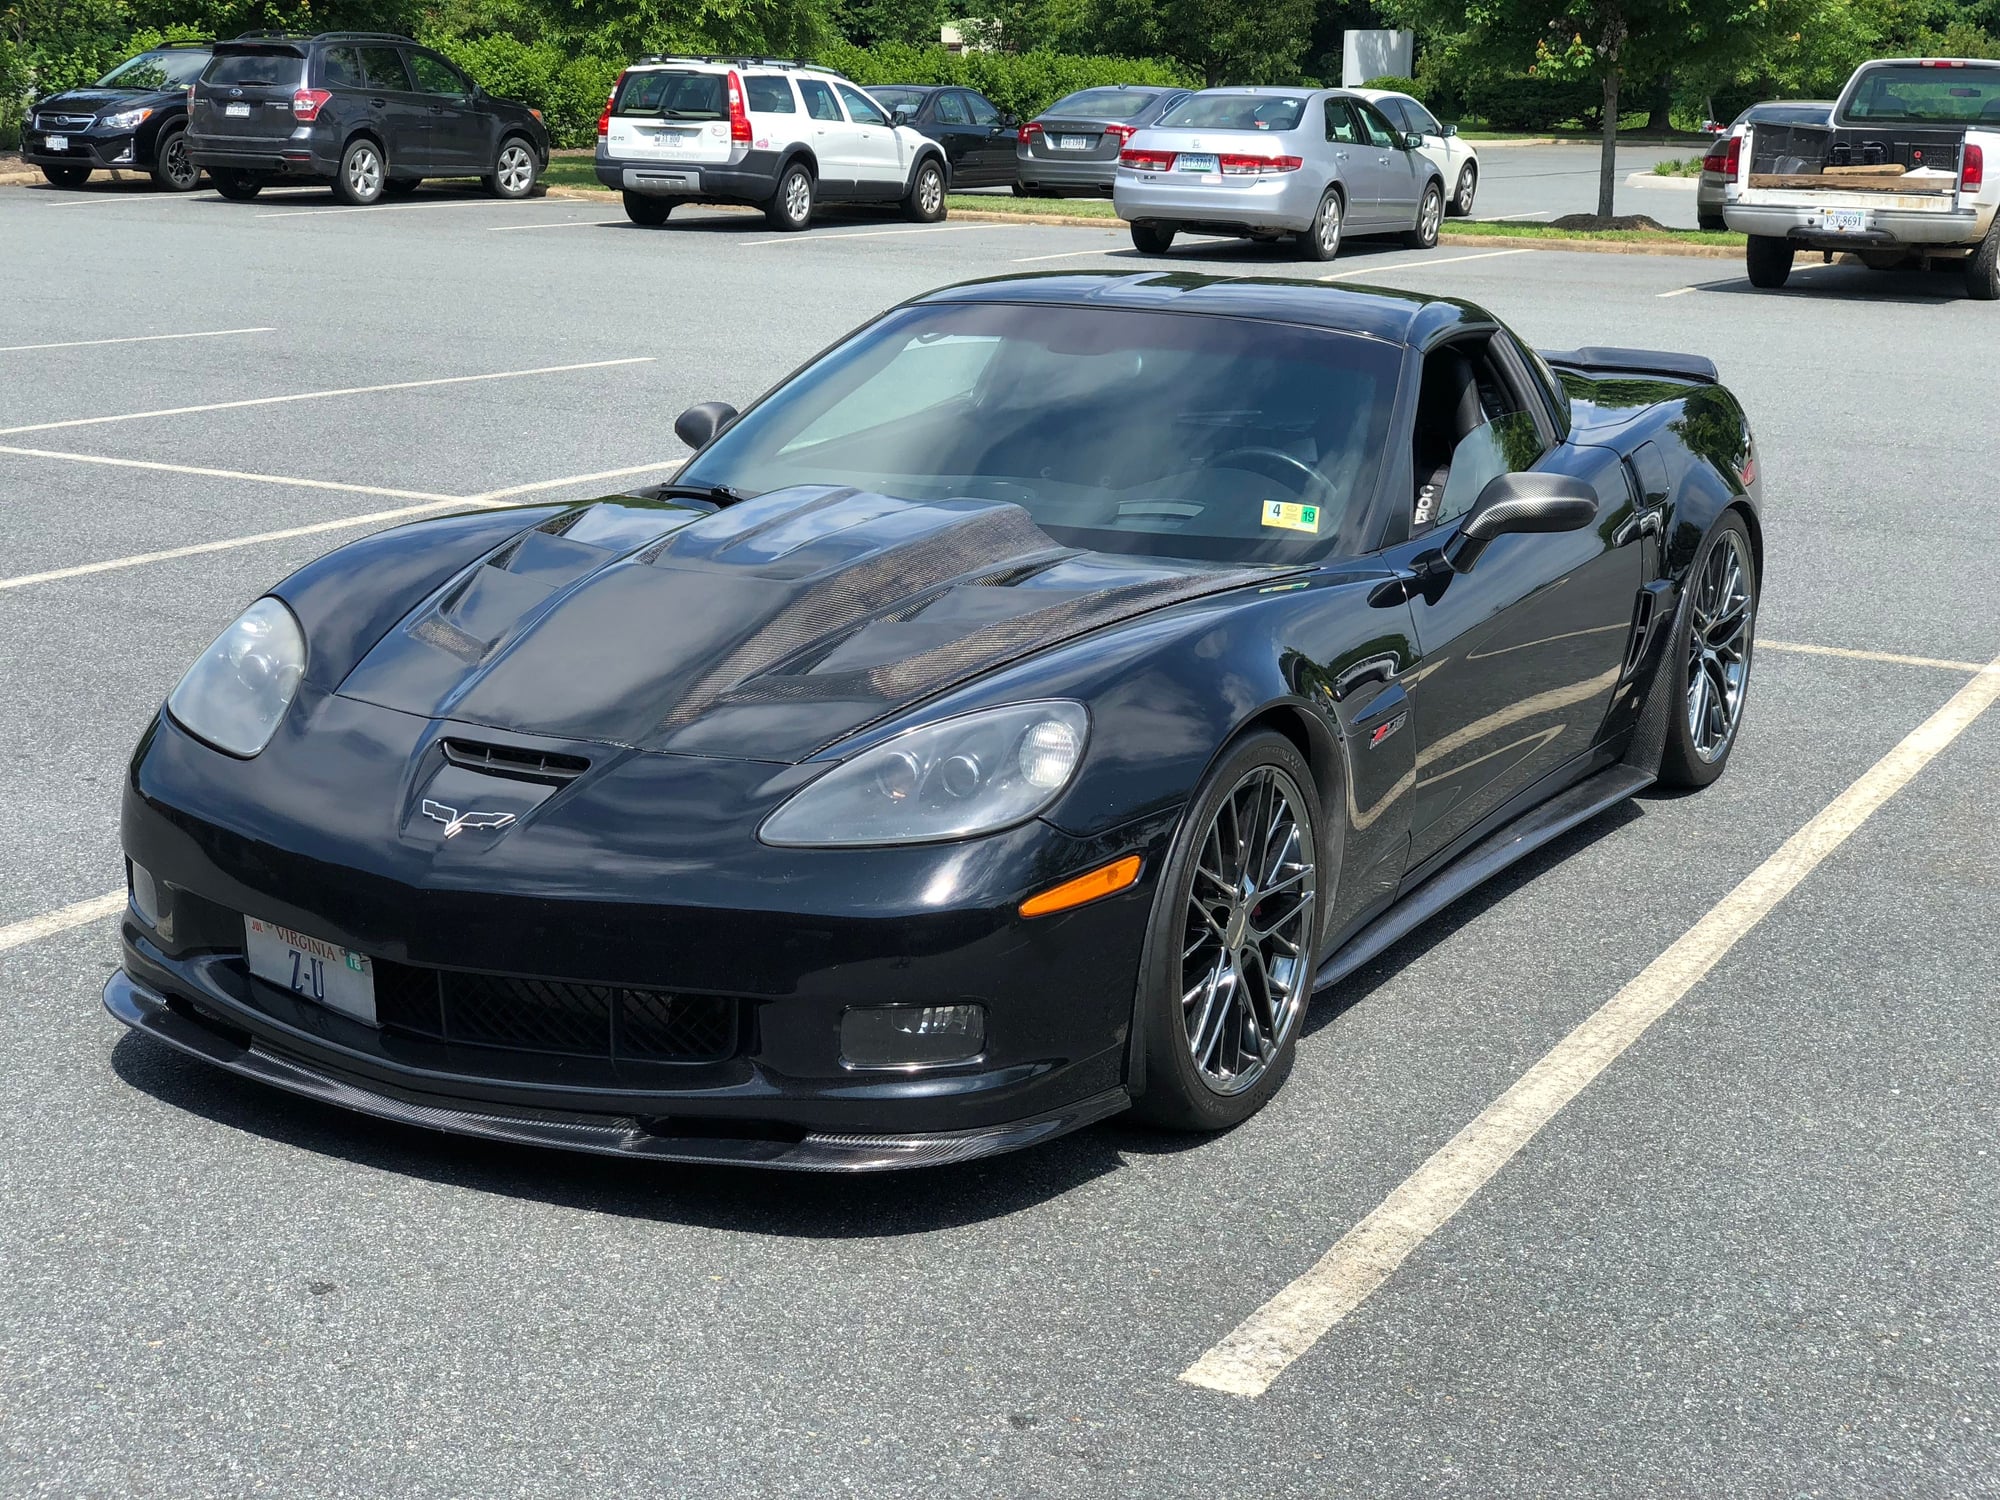 2006 Chevrolet Corvette - Heavily Modified 2006 Z06 For Sale in Charlottesville Virginia - Used - VIN 1G1YY26EX65121570 - 145,000 Miles - 8 cyl - 2WD - Manual - Coupe - Black - Charlottesville, VA 22901, United States